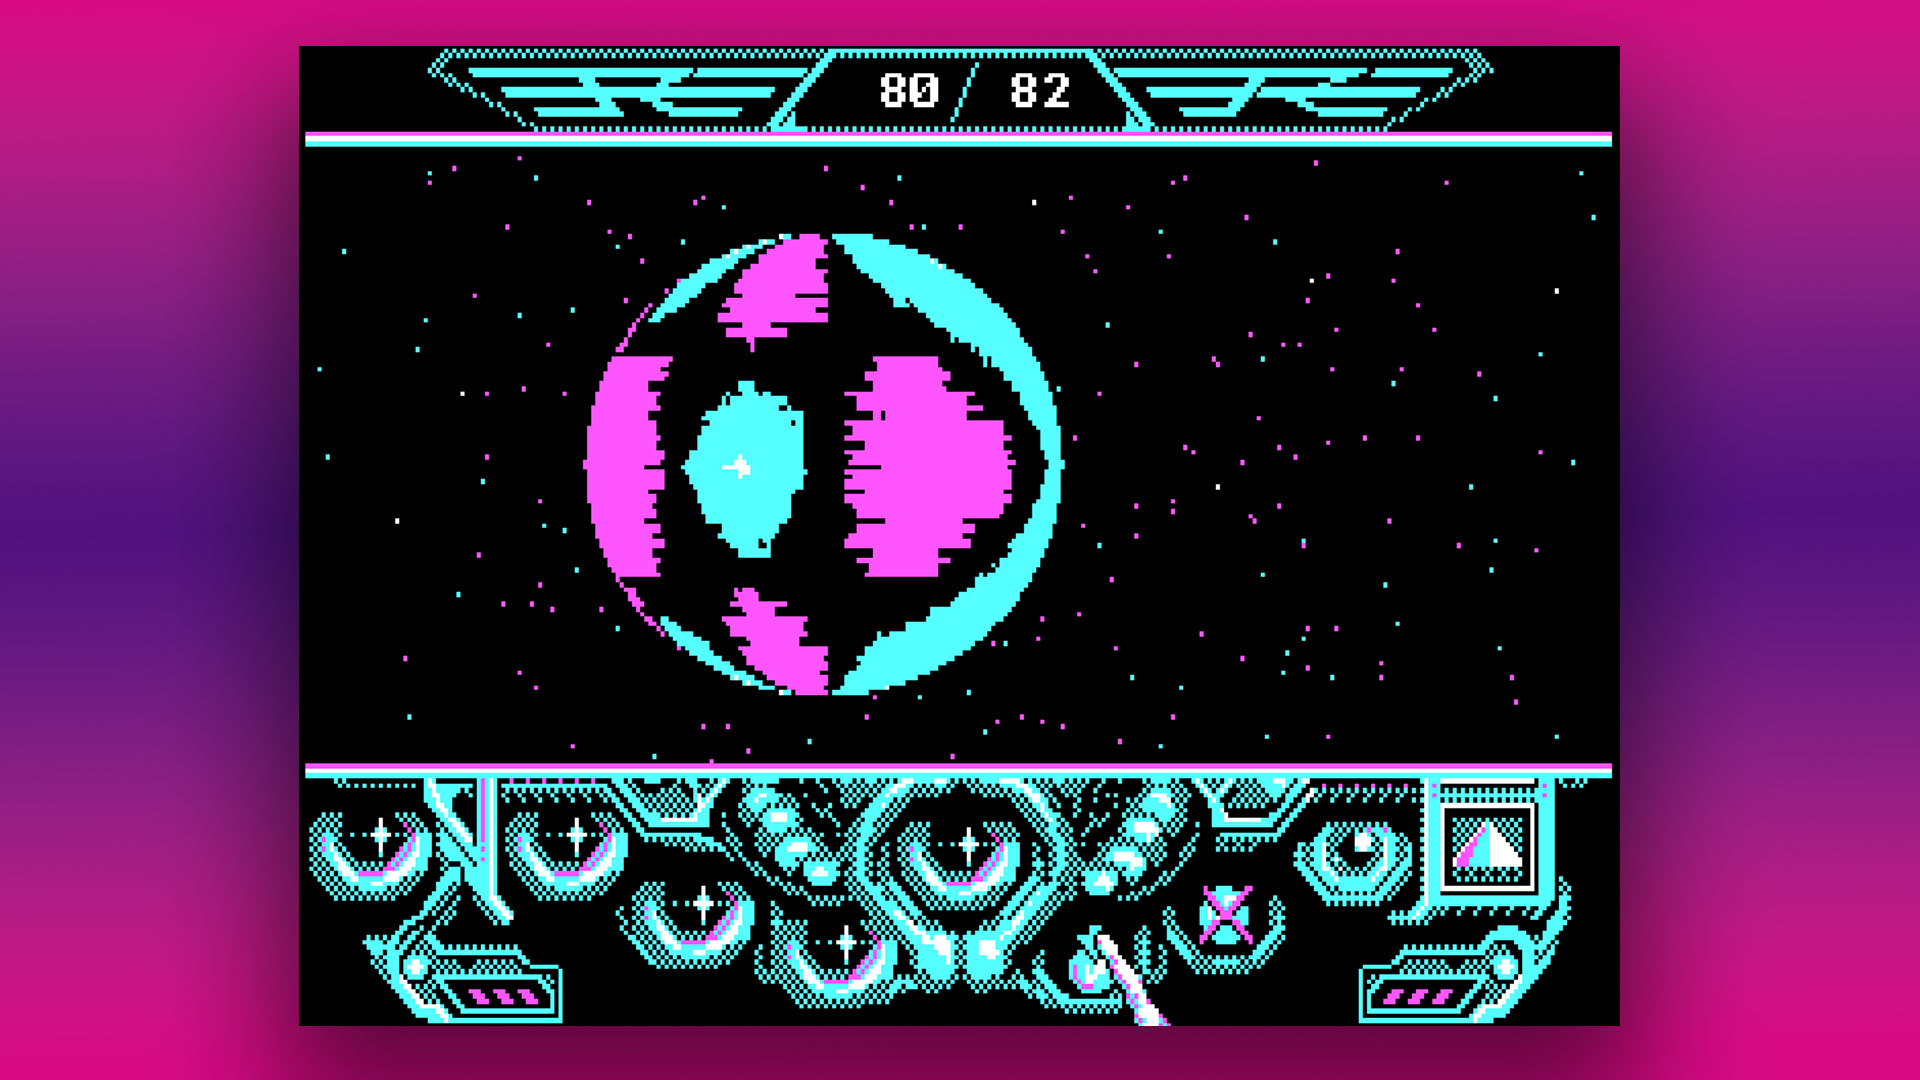 CGA graphics: Captain Blood in BIOS mode 4, palette 1, high intensity